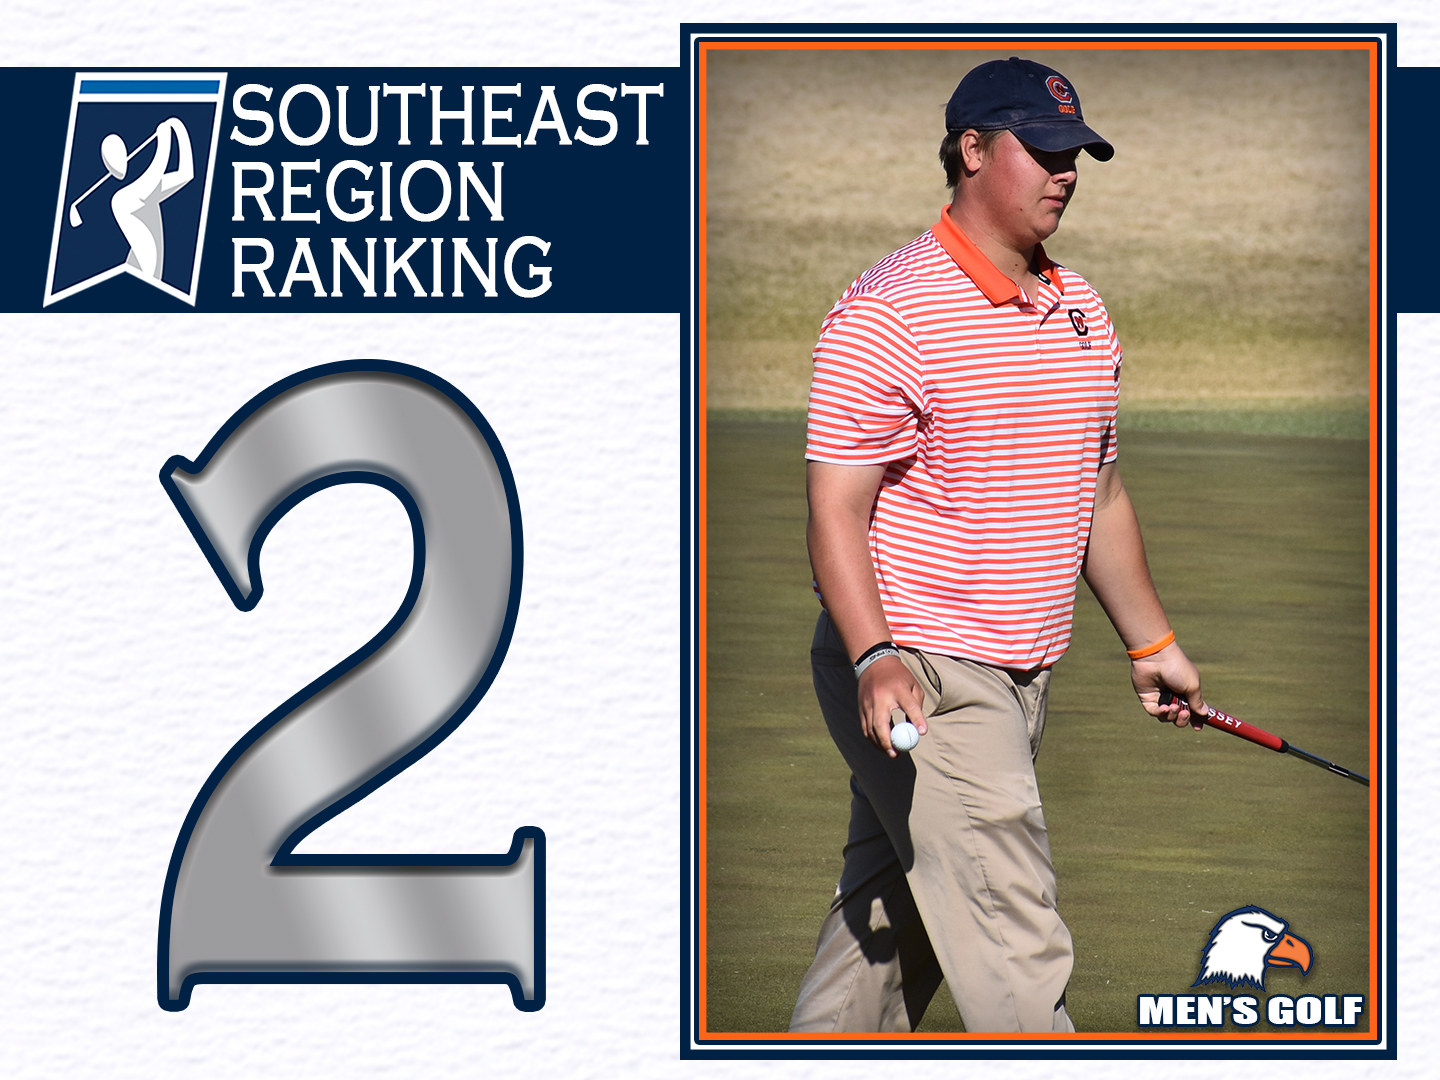 C-N holds tight at second in latest Southeast Regional Rankings